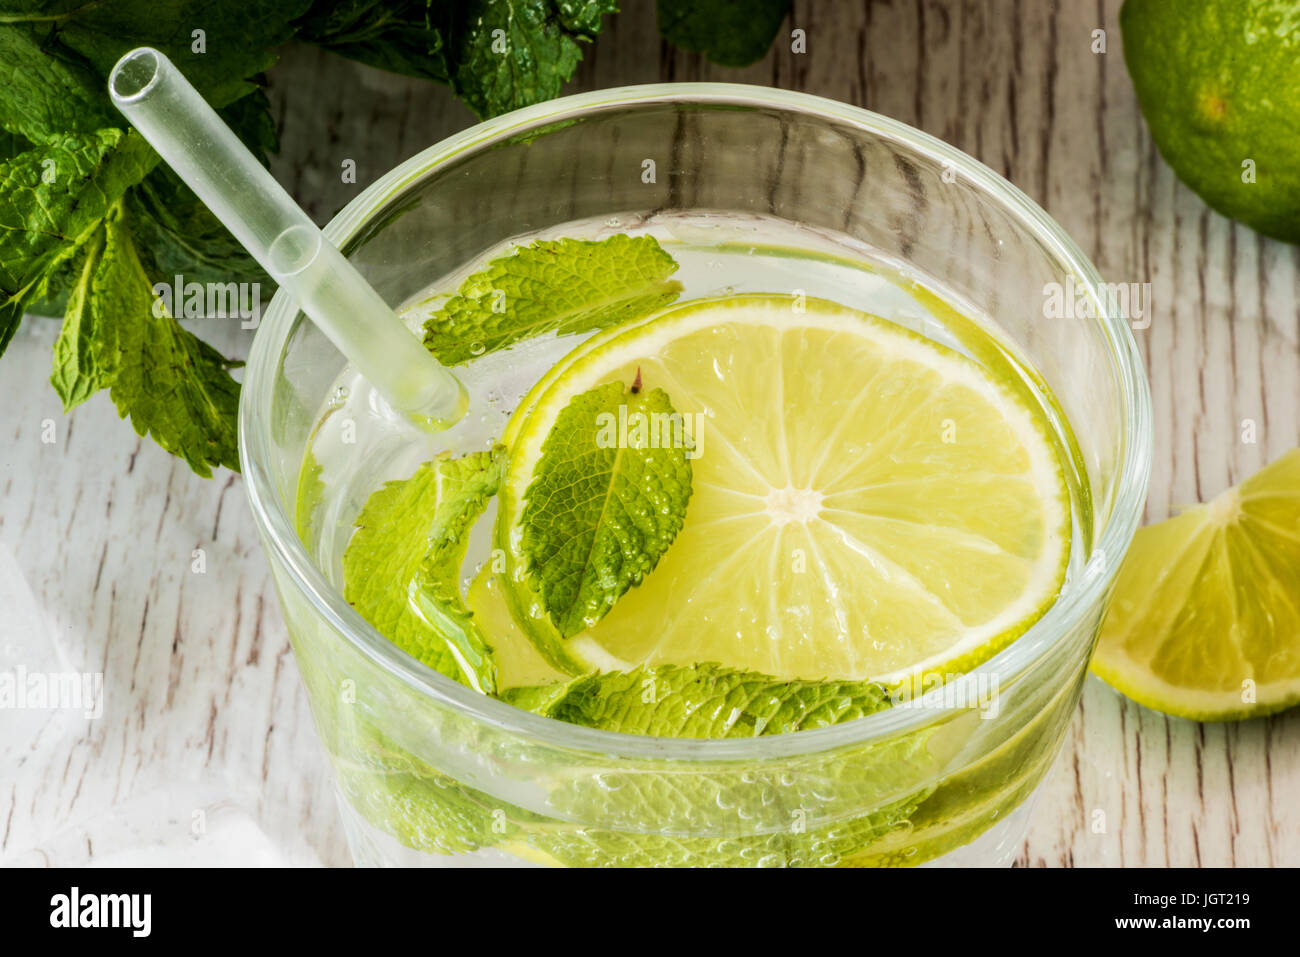 https://c8.alamy.com/comp/JGT219/mojito-cocktail-with-lime-mint-and-ice-on-white-wooden-background-JGT219.jpg